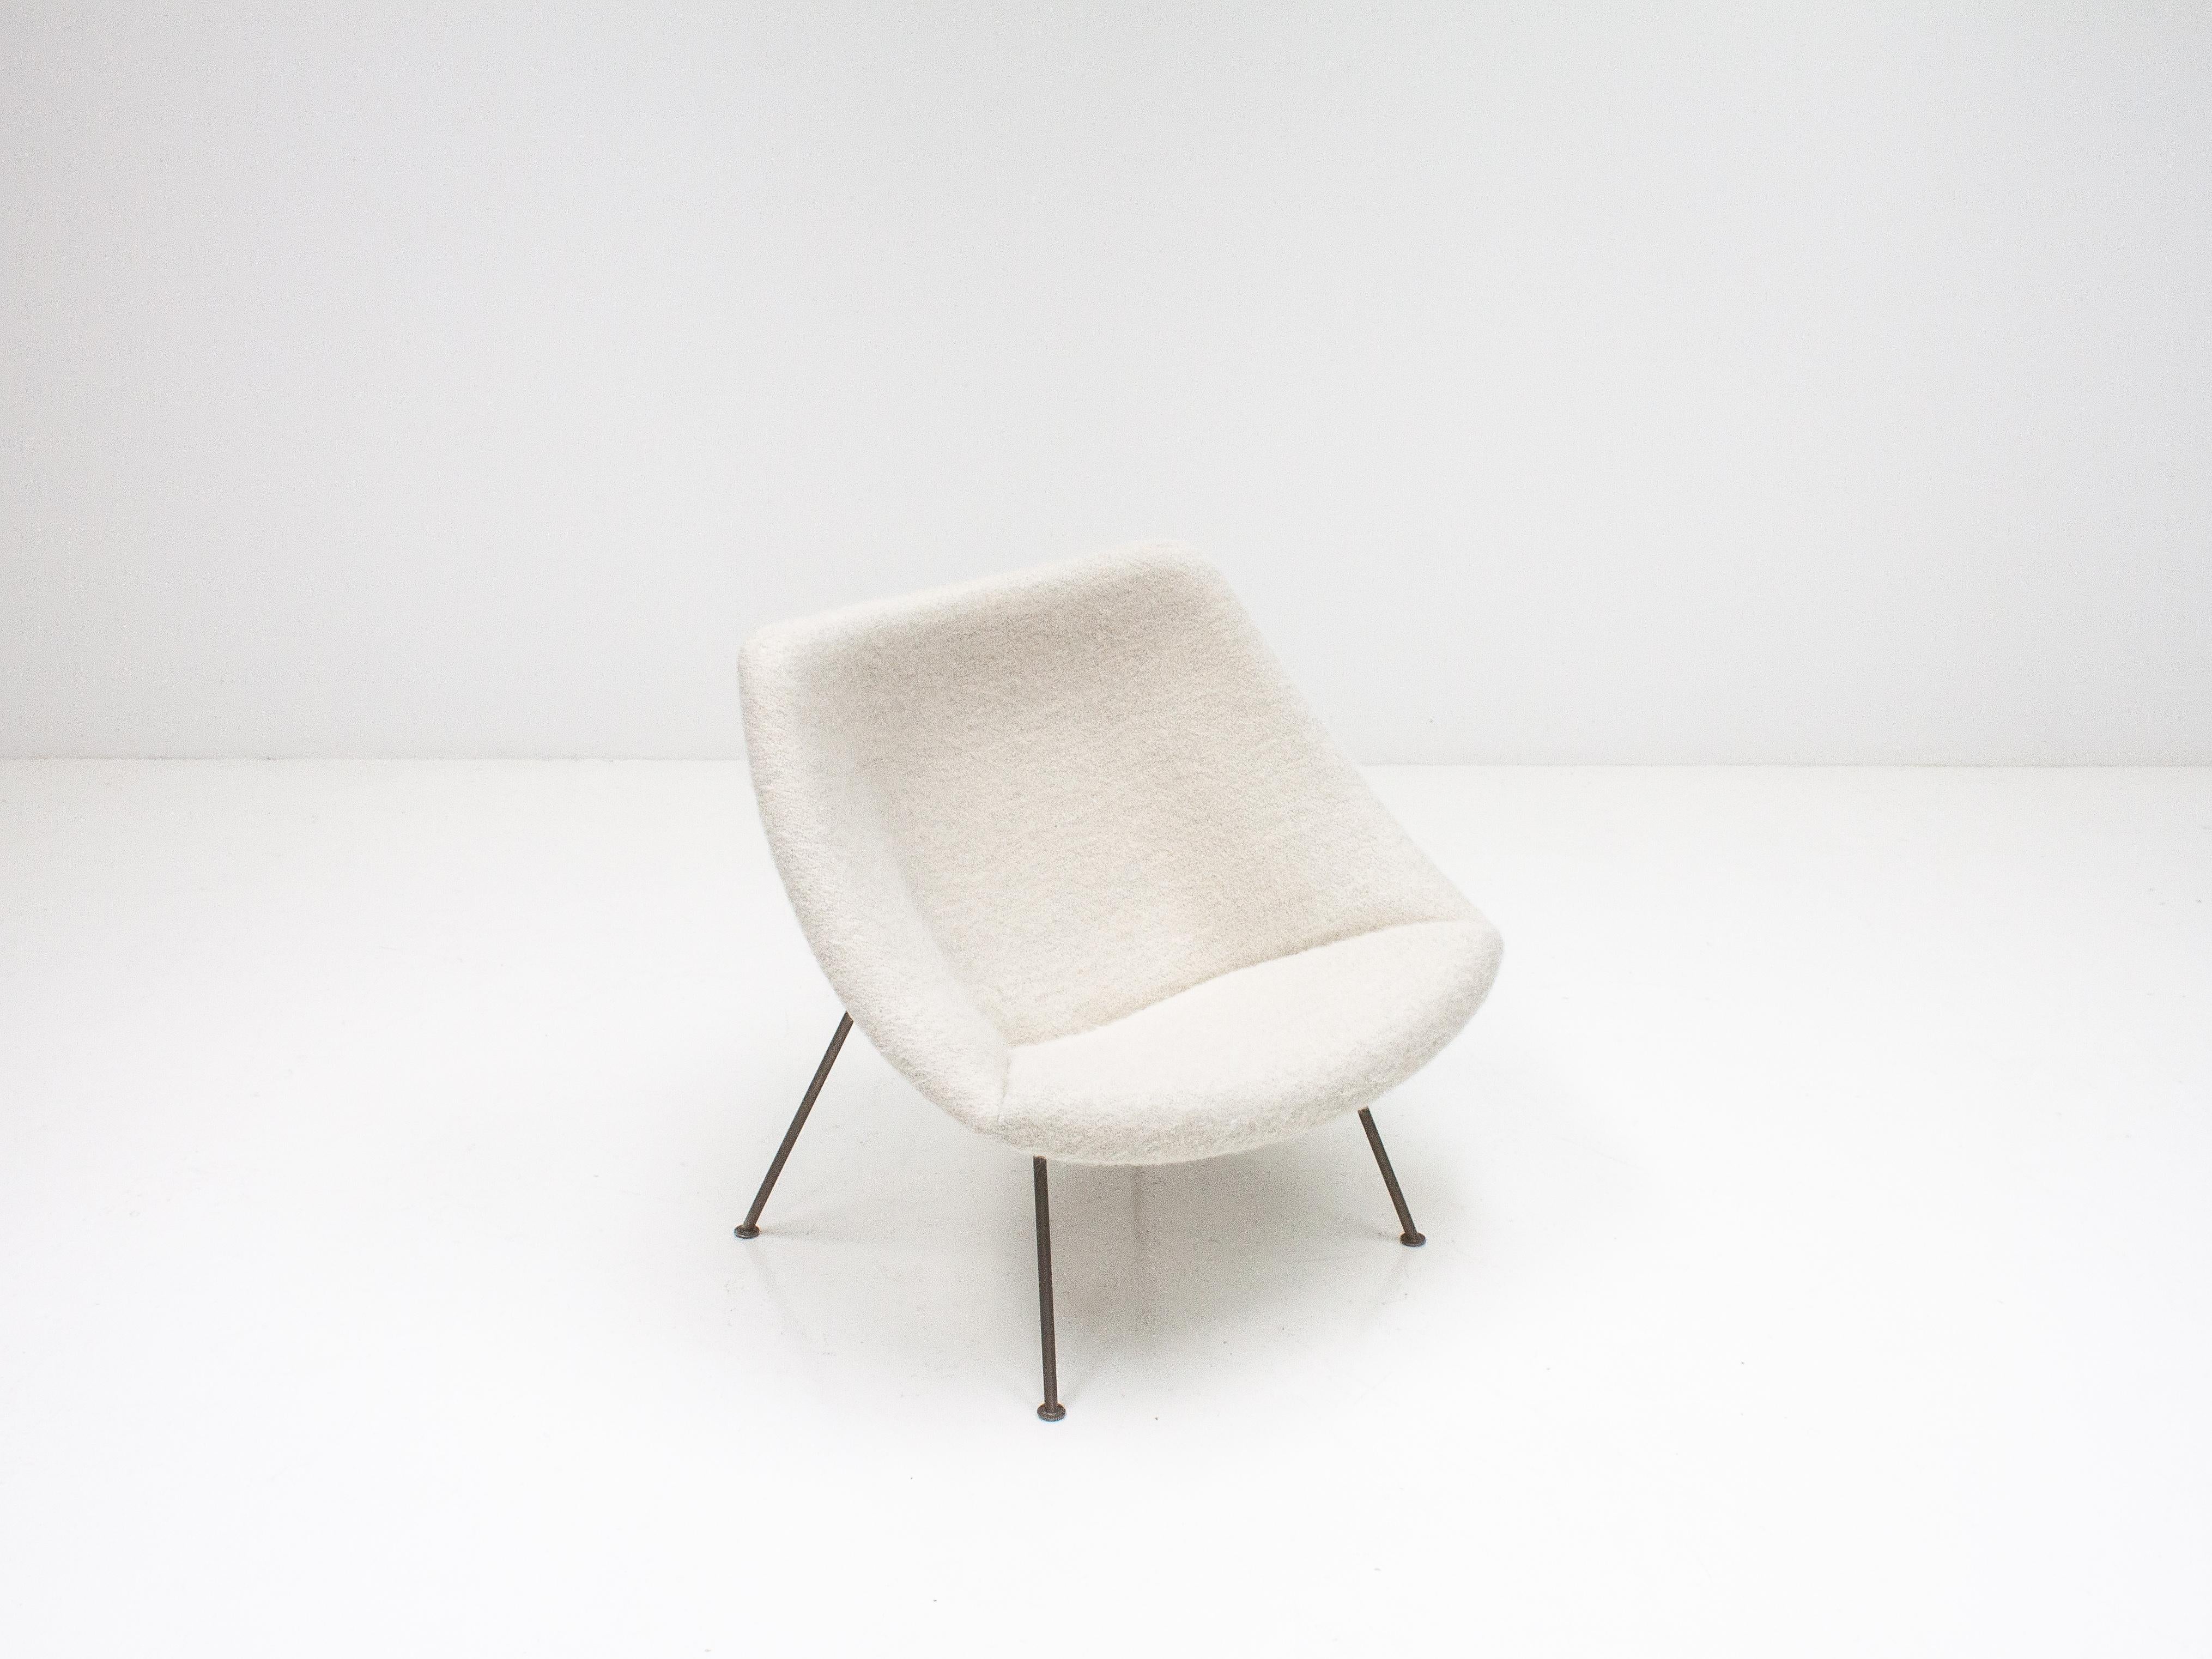 A 1st edition Pierre Paulin oyster lounge chair in newly upholstered fluffy wool, mohair and alpaca Pierre Frey fabric.

This 'little oyster' version is rarer than the larger and it was only produced for a short time, from 1965-1970, and has never